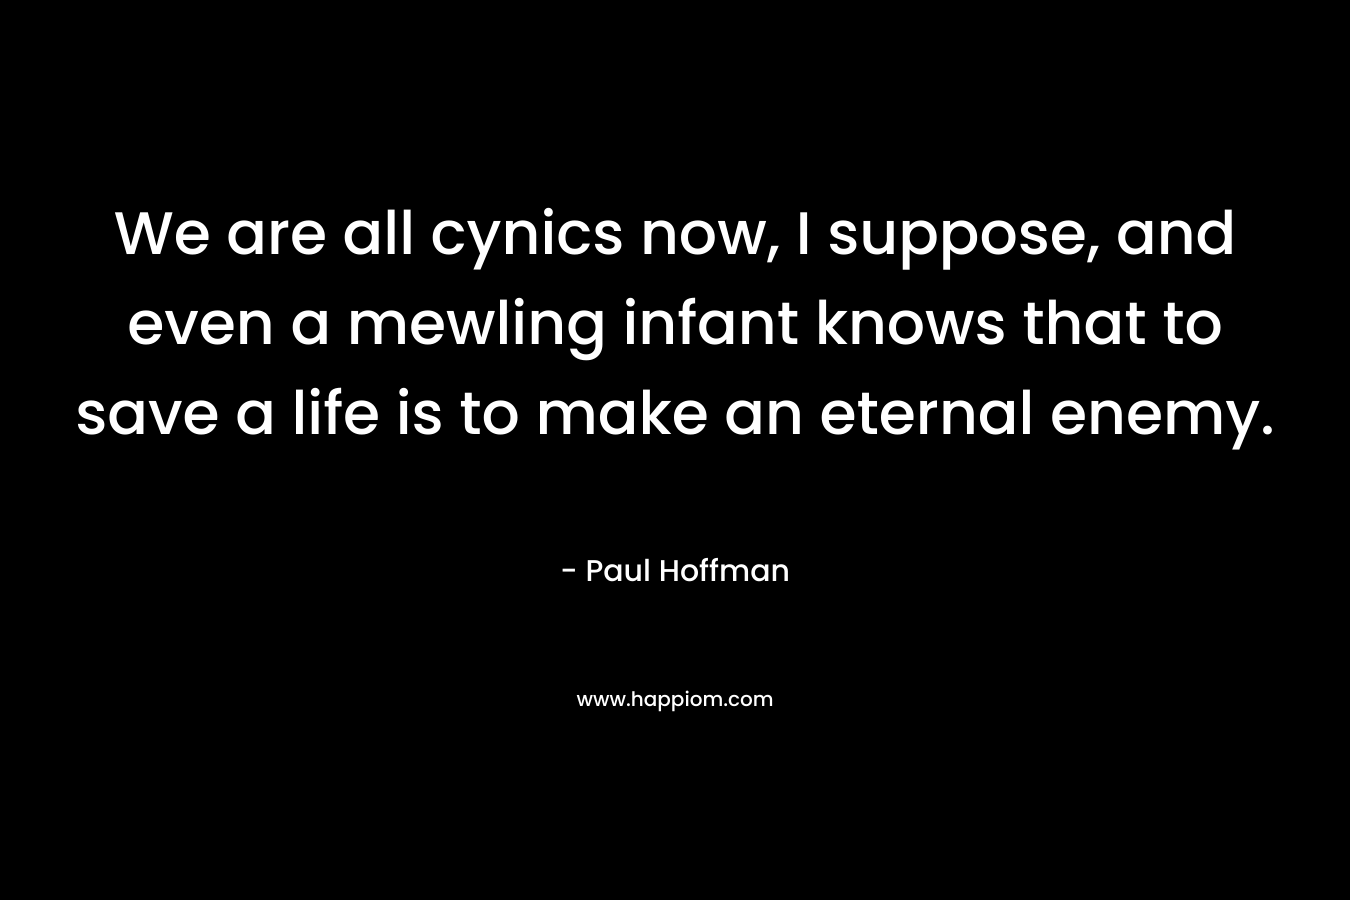 We are all cynics now, I suppose, and even a mewling infant knows that to save a life is to make an eternal enemy. – Paul Hoffman